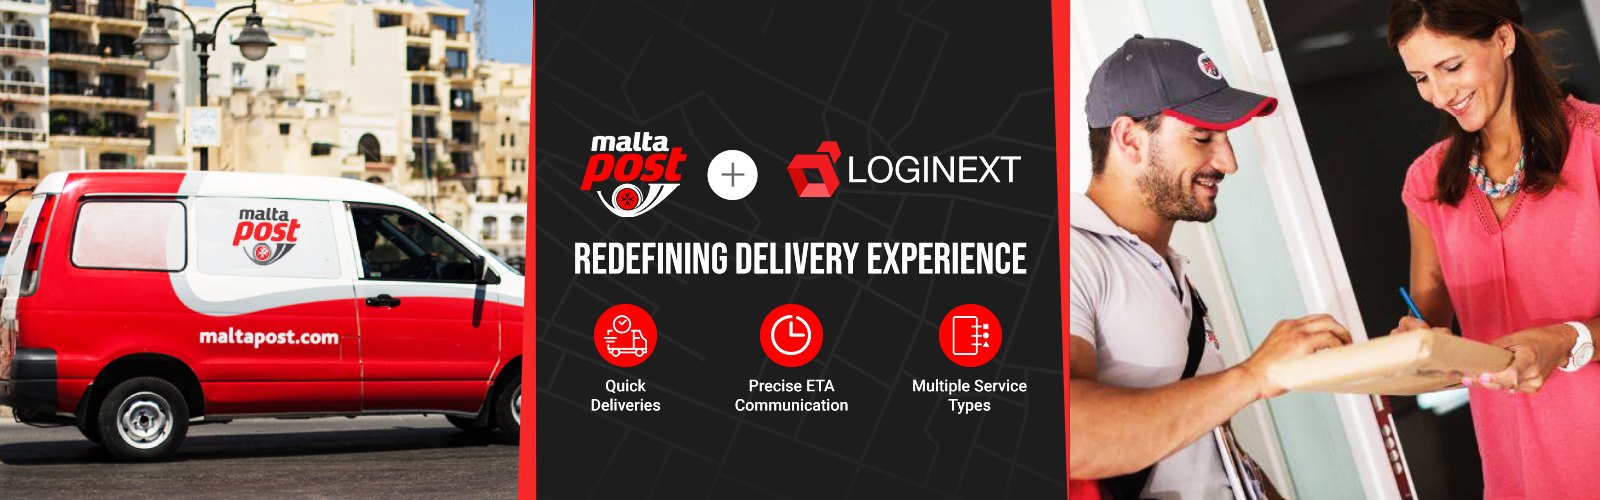 MaltaPost to enhance customer experience by adopting LogiNext’s Delivery Automation Platform